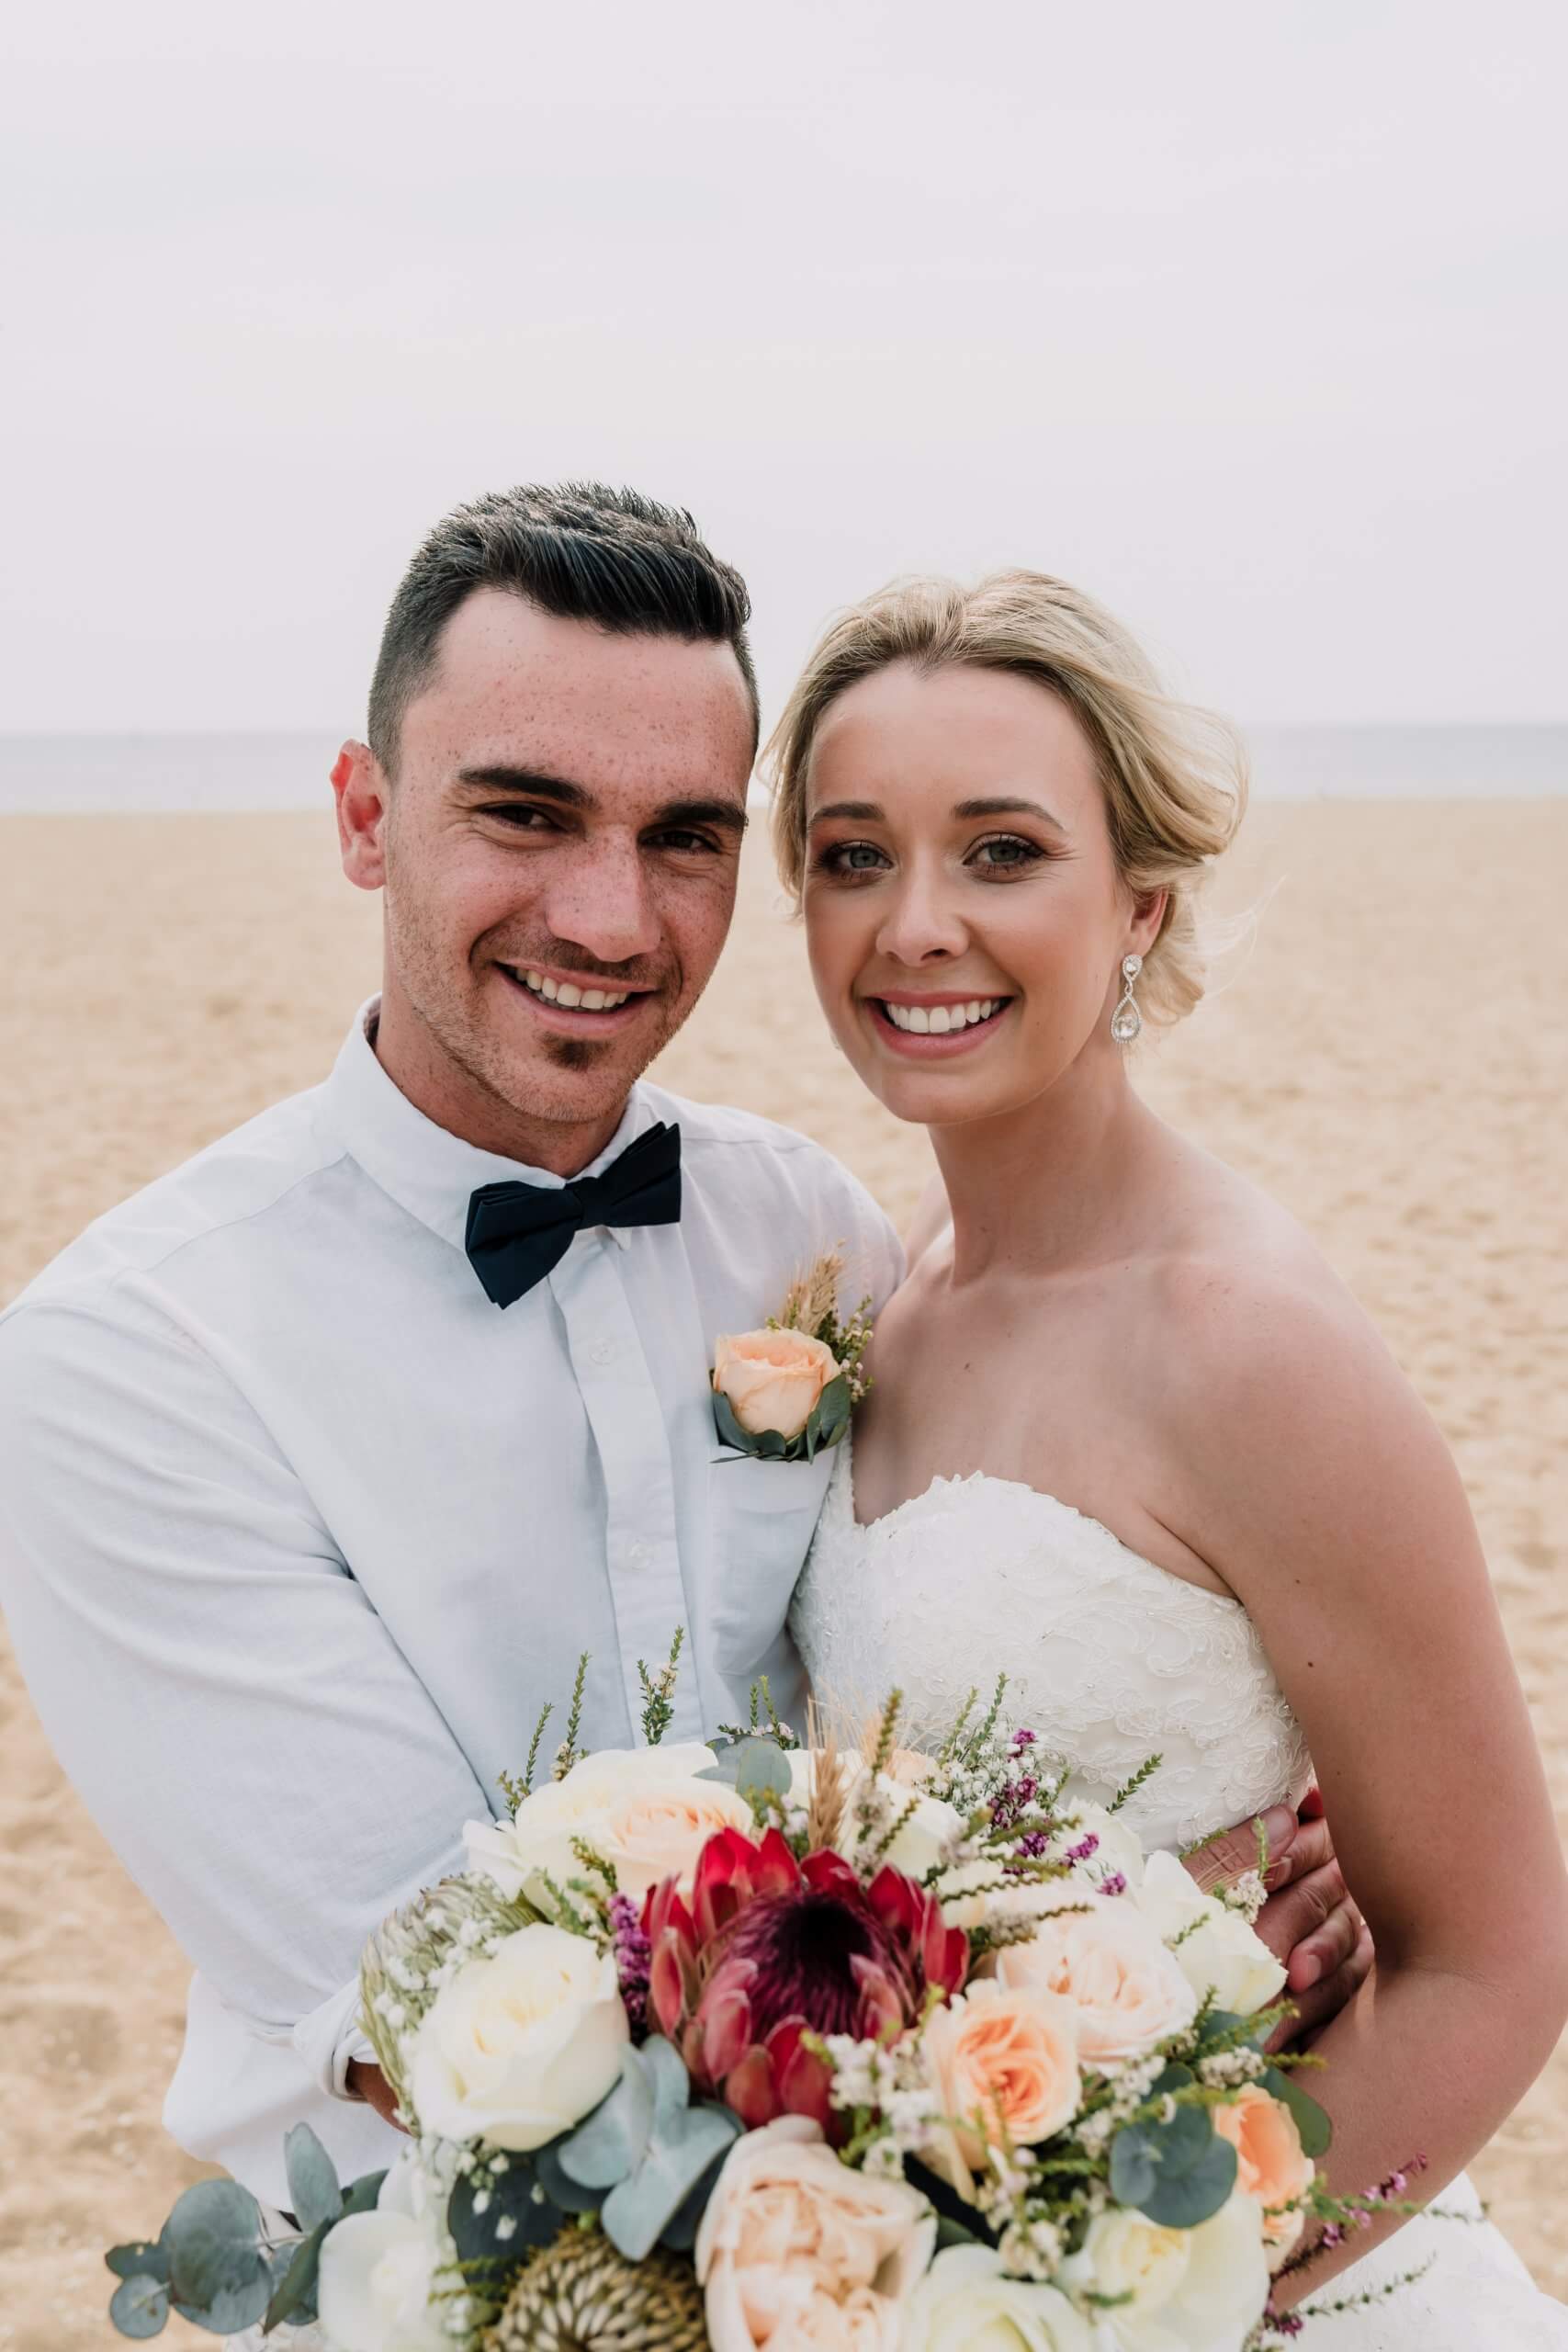 A lovely shot of the bride and groom happily smiling by the beach captured by Black Avenue Productions